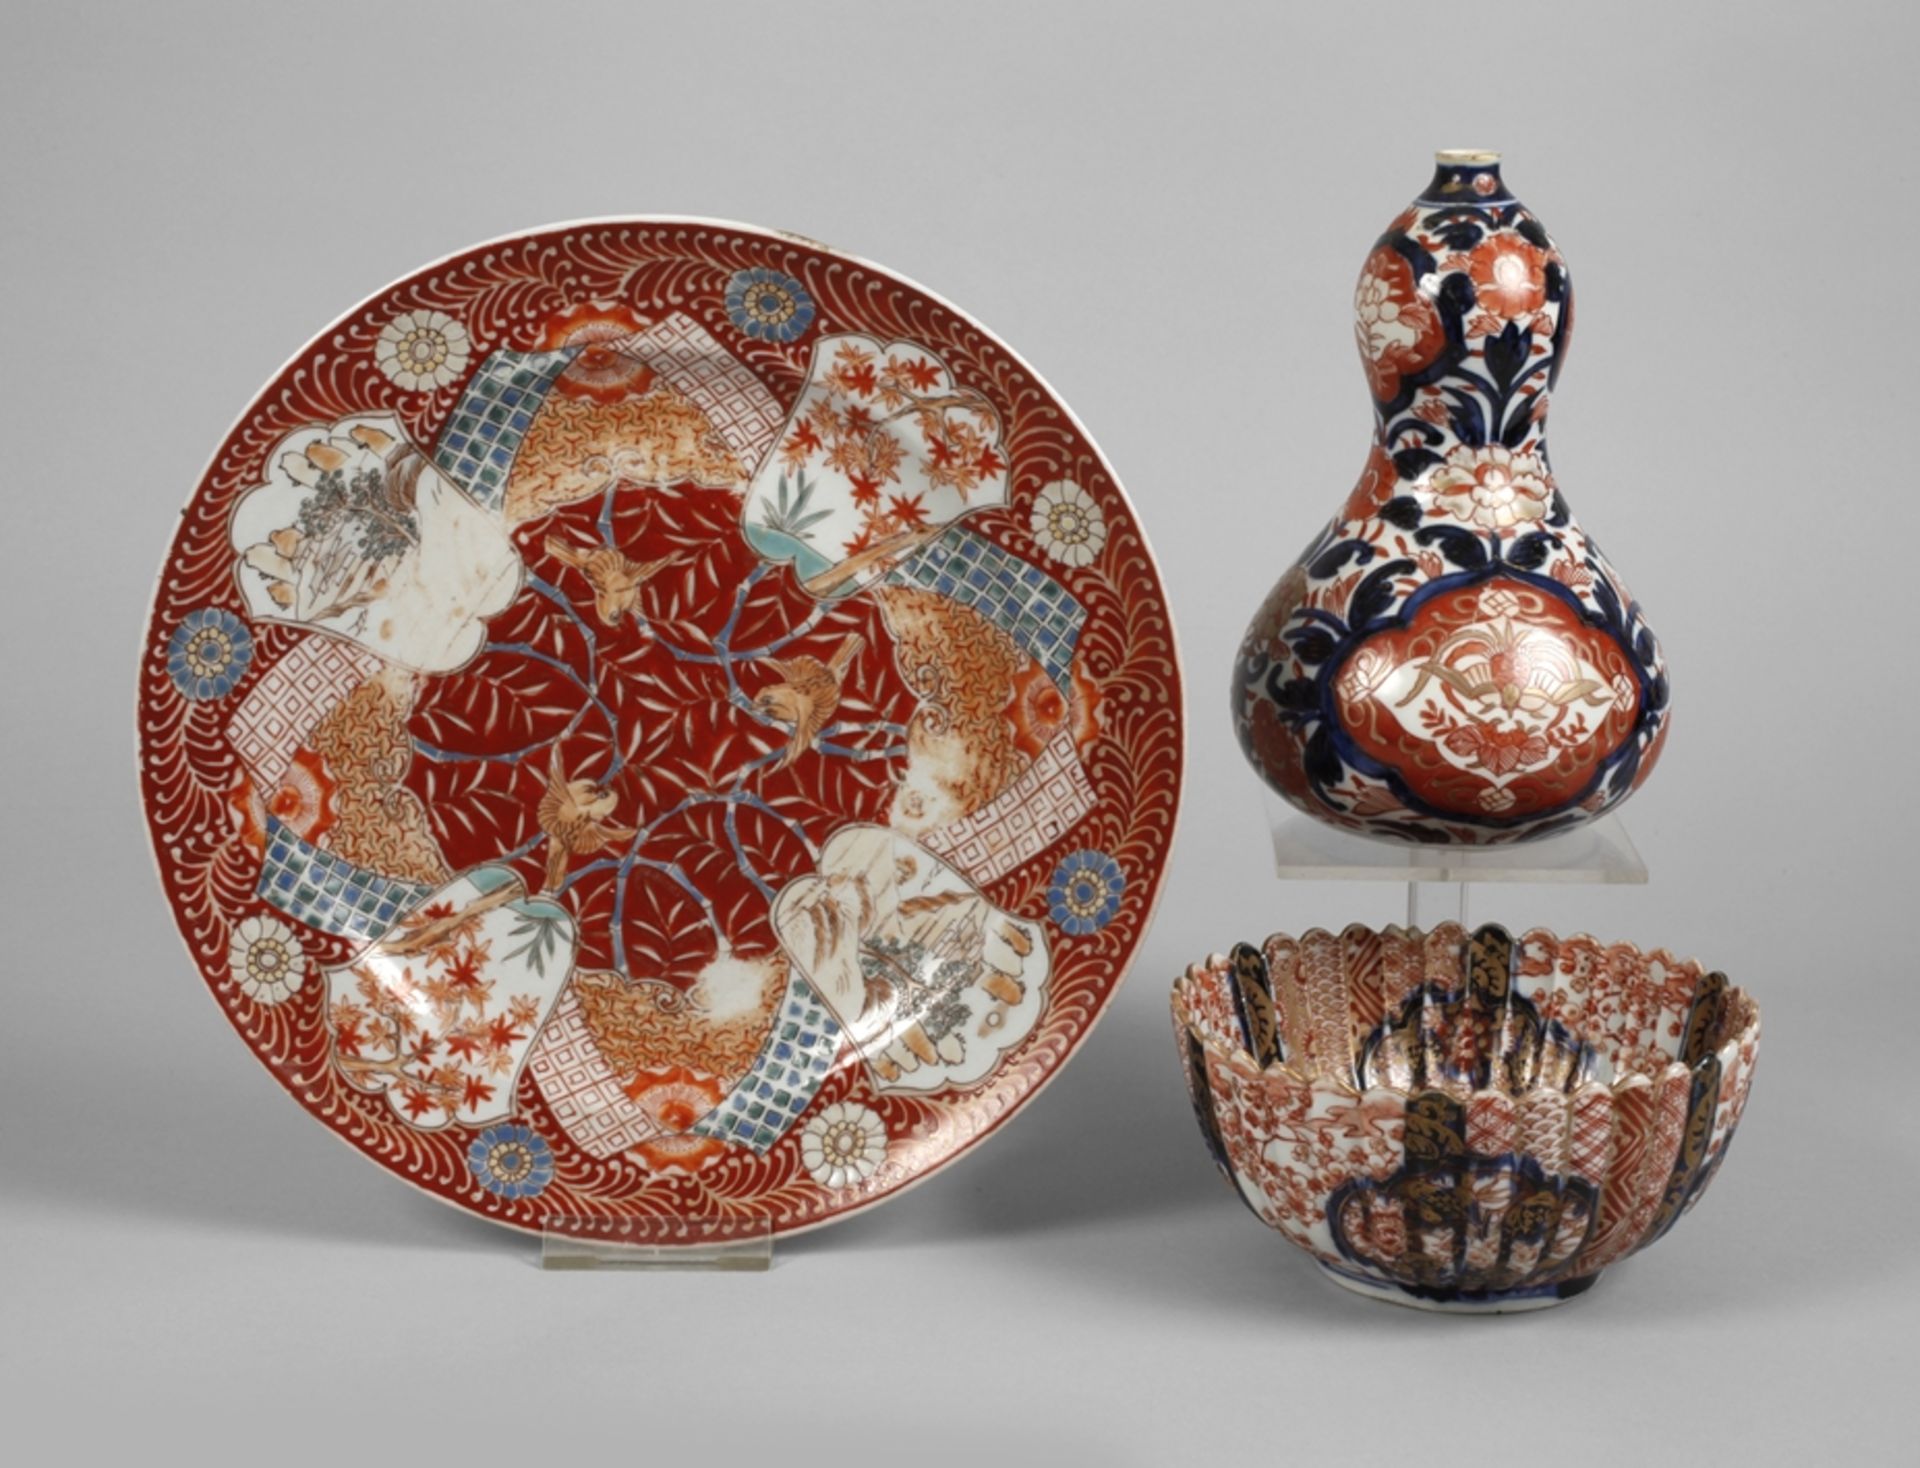 Three pieces of porcelain